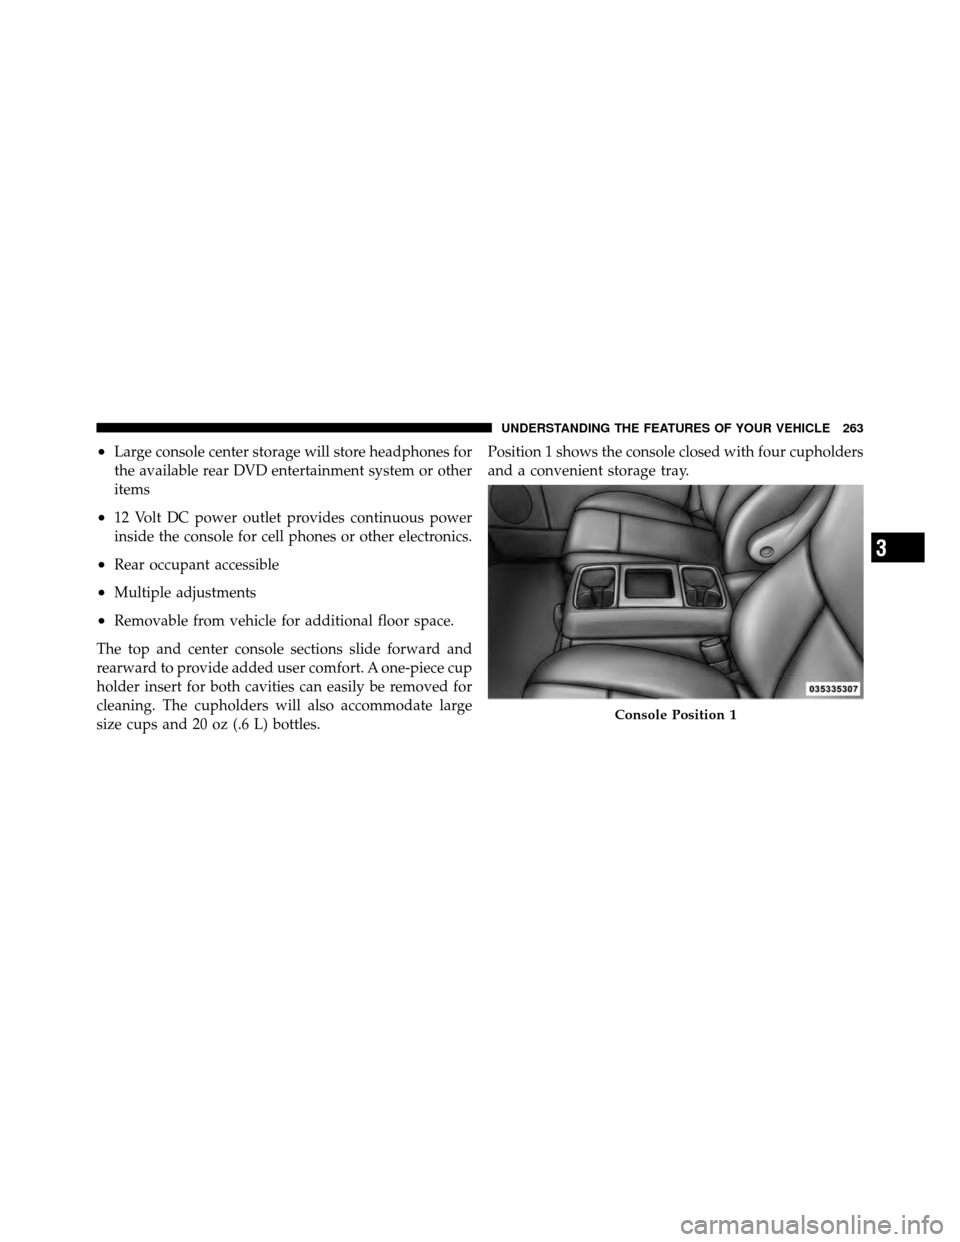 Ram Cargo Van 2012  Owners Manual •Large console center storage will store headphones for
the available rear DVD entertainment system or other
items
•12 Volt DC power outlet provides continuous power
inside the console for cell ph